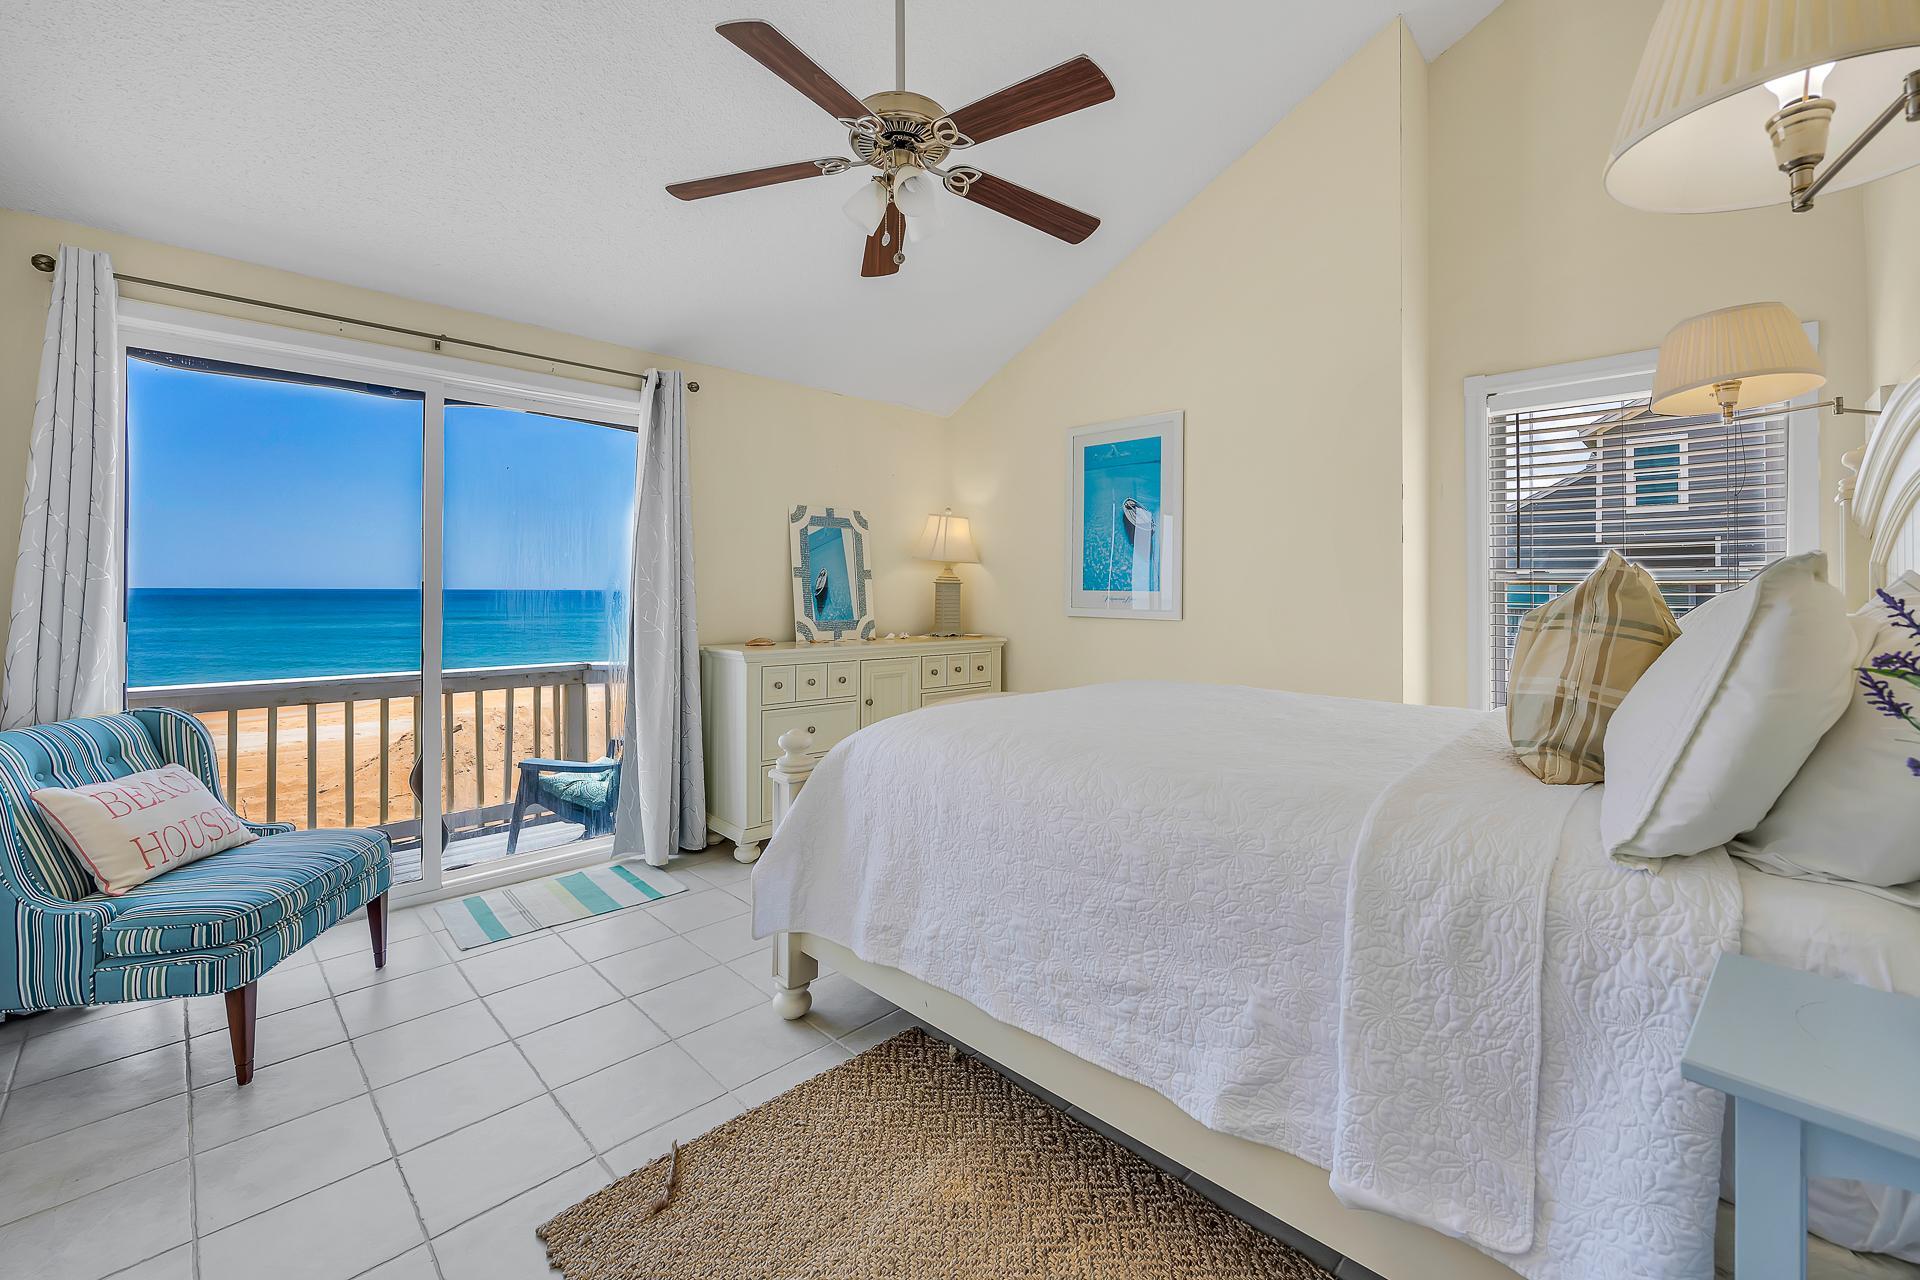 queen bedroom w/ private balcony and ocean view